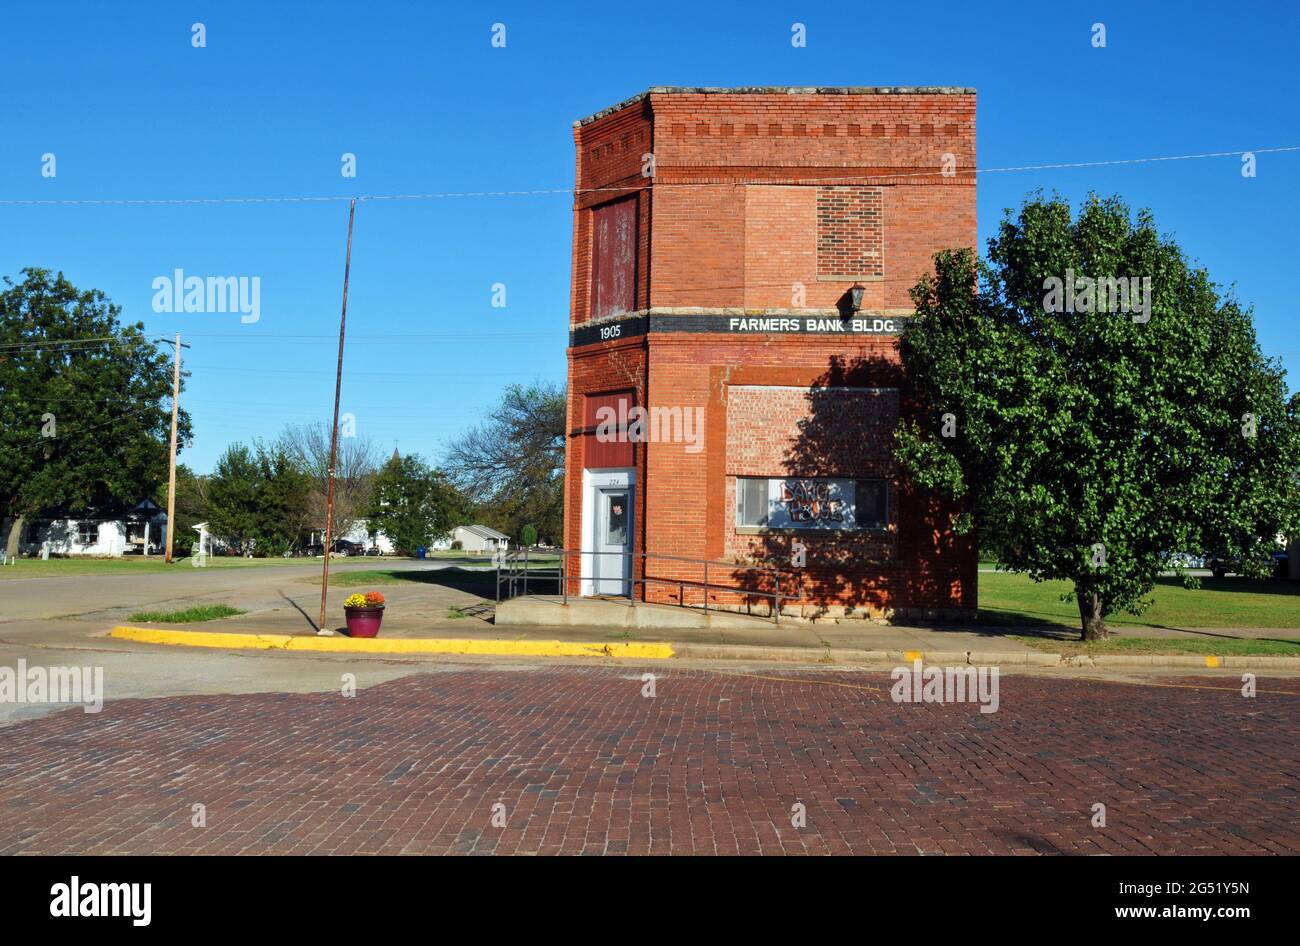 The 1905 Farmers Bank building stands along the red brick-paved Broadway street in the historic Route 66 town of Davenport, Oklahoma. Stock Photo